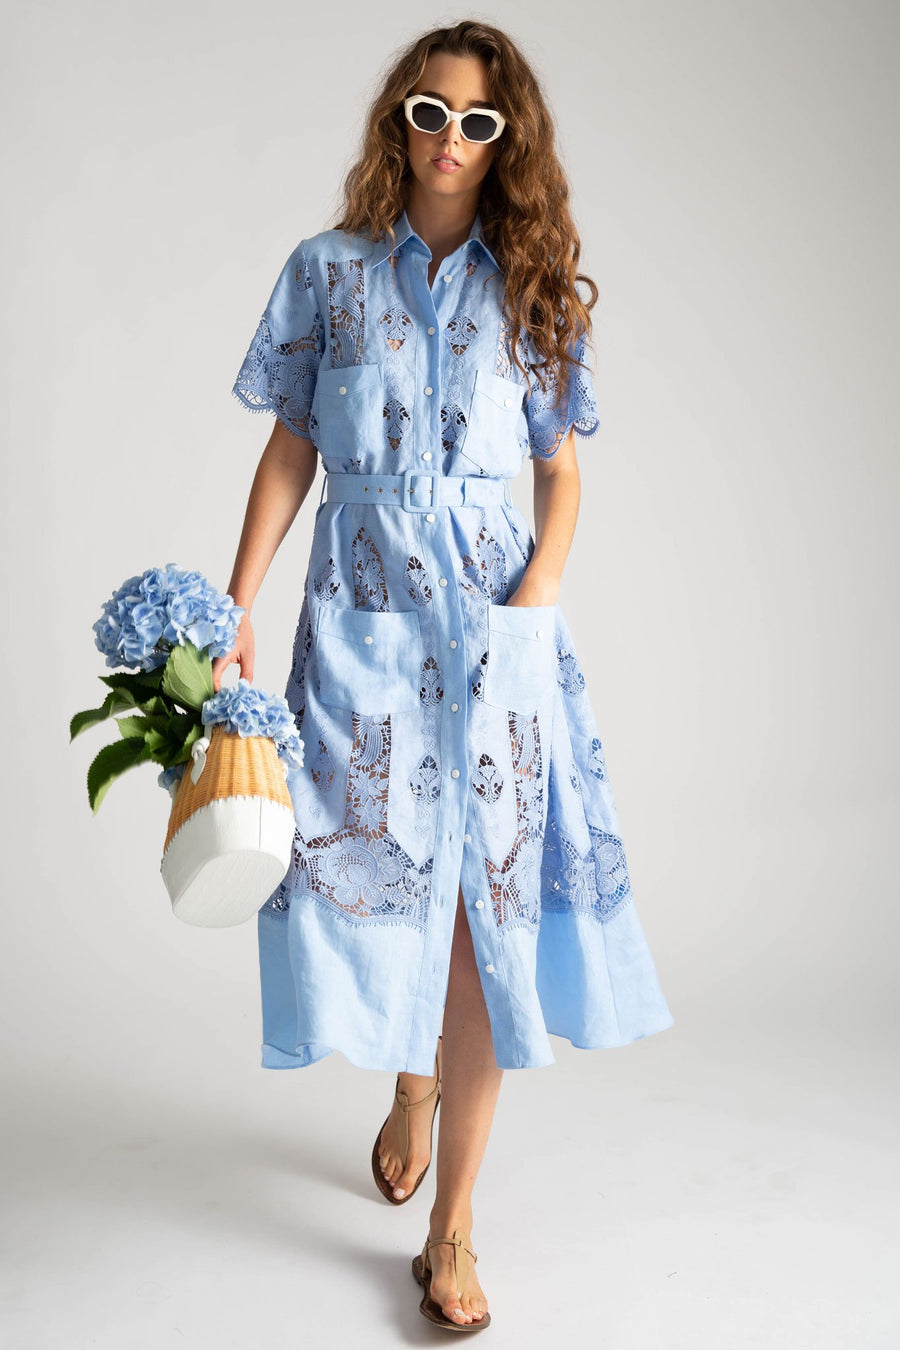 This is a photo of a woman wearing a light blue mid length dress with a button down front, 2 front square pockets on chest, and 2 front square pockets below waistline. The dress is styled with a removable blue linen belt, white sunglasses, and a white and natural straw bag filled with blue hibiscus flowers.